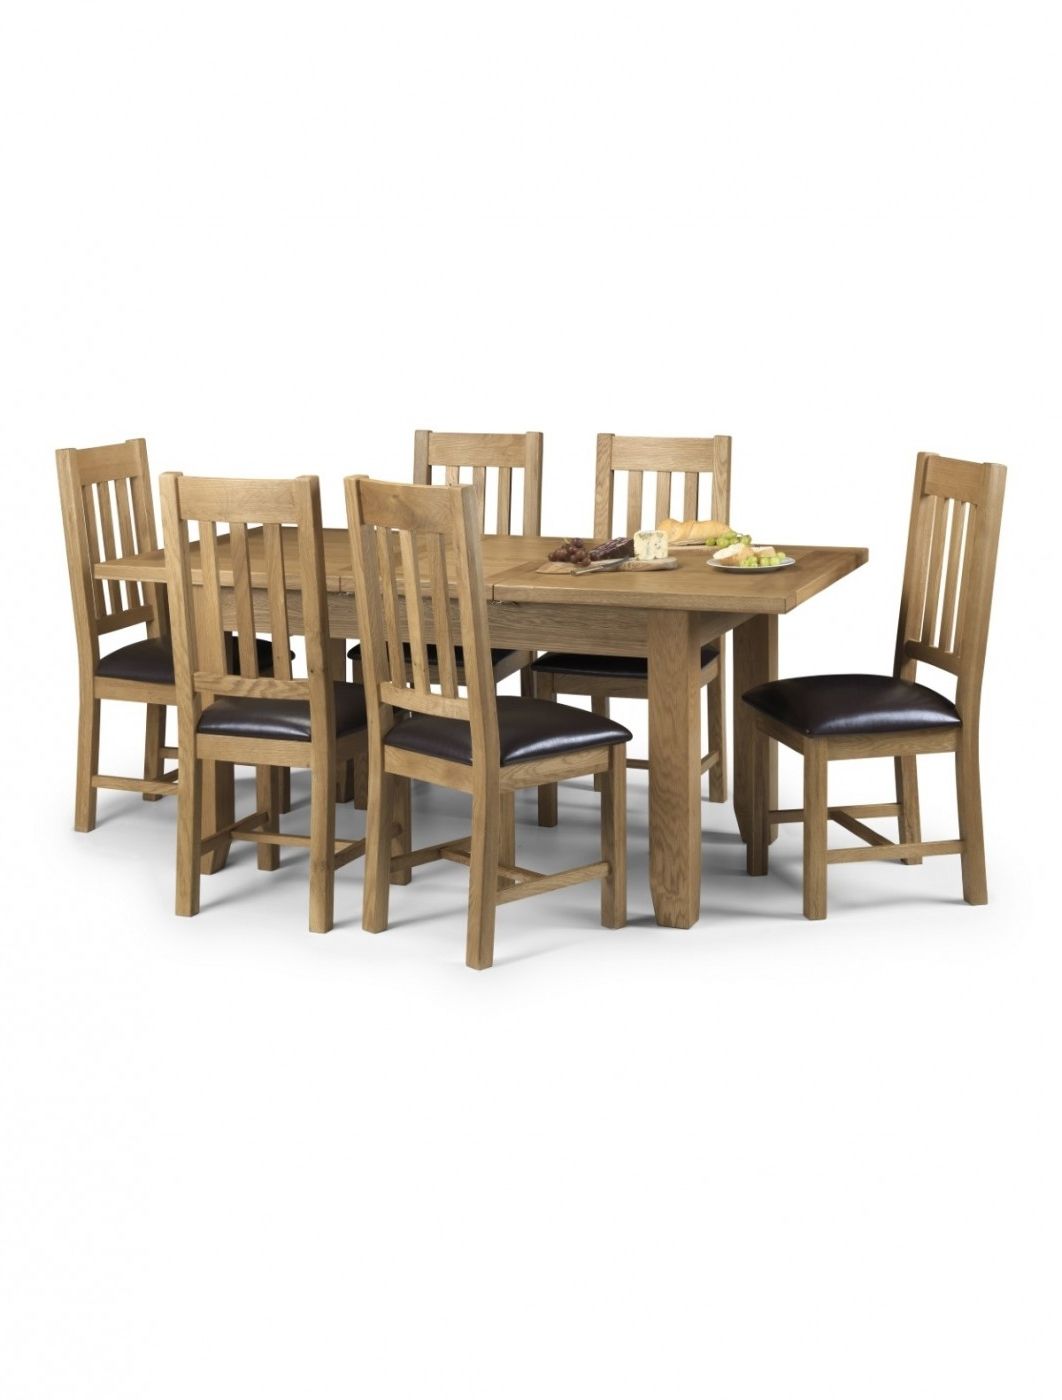 121 In Solid Oak Dining Tables And 6 Chairs (View 18 of 25)